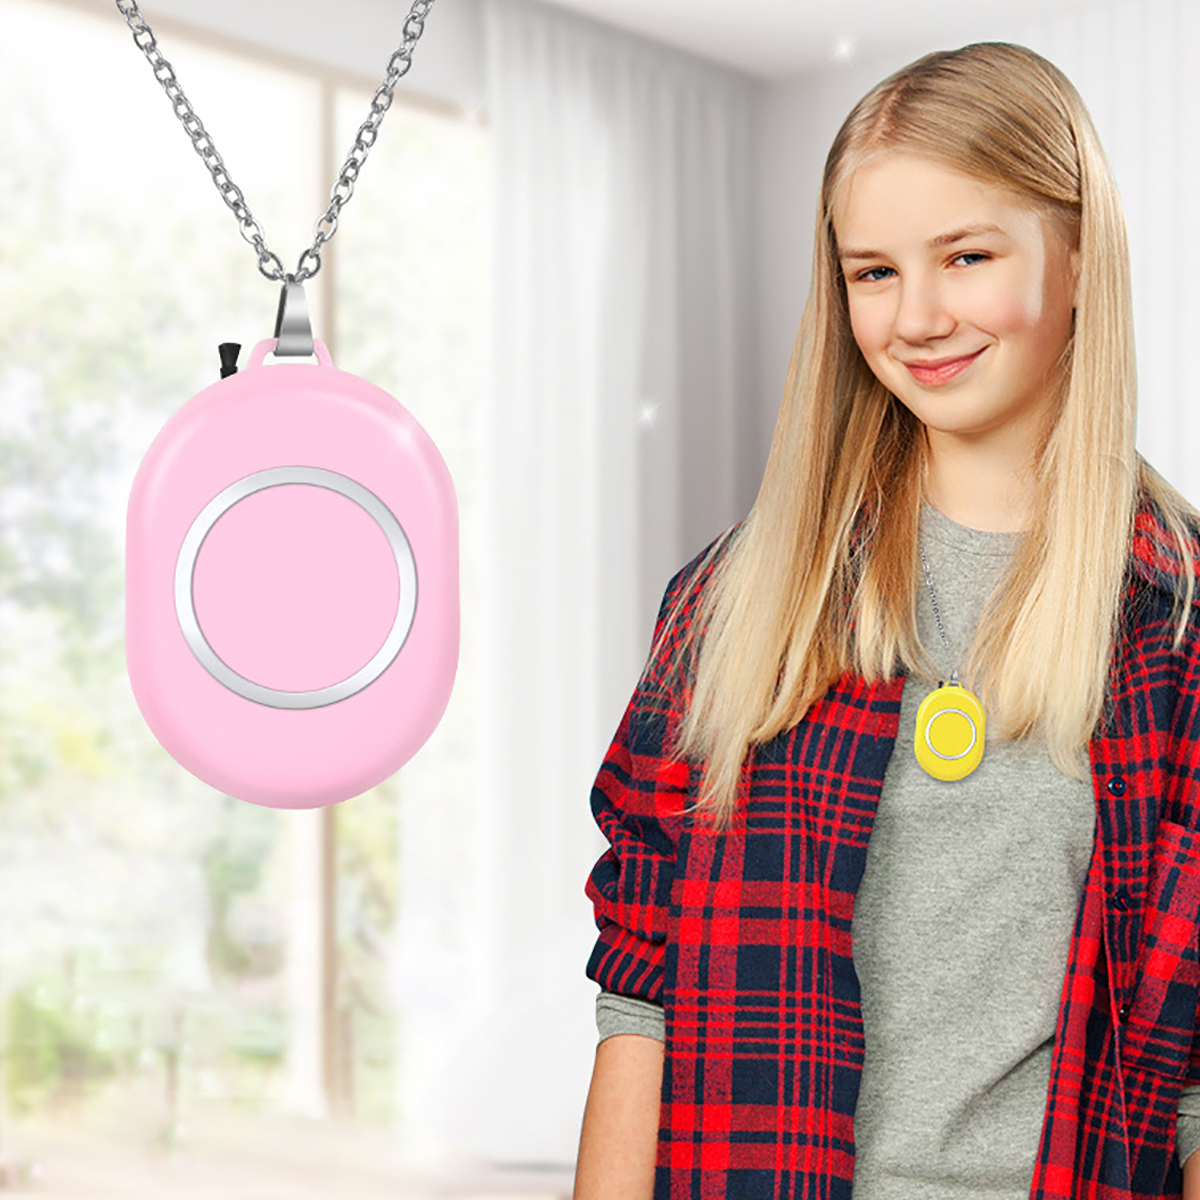 Mini-Portable-Air-Purifier-Negative-Ions-Neck-Hanging-Necklace-Personal-Air-Cleaner-1707470-9